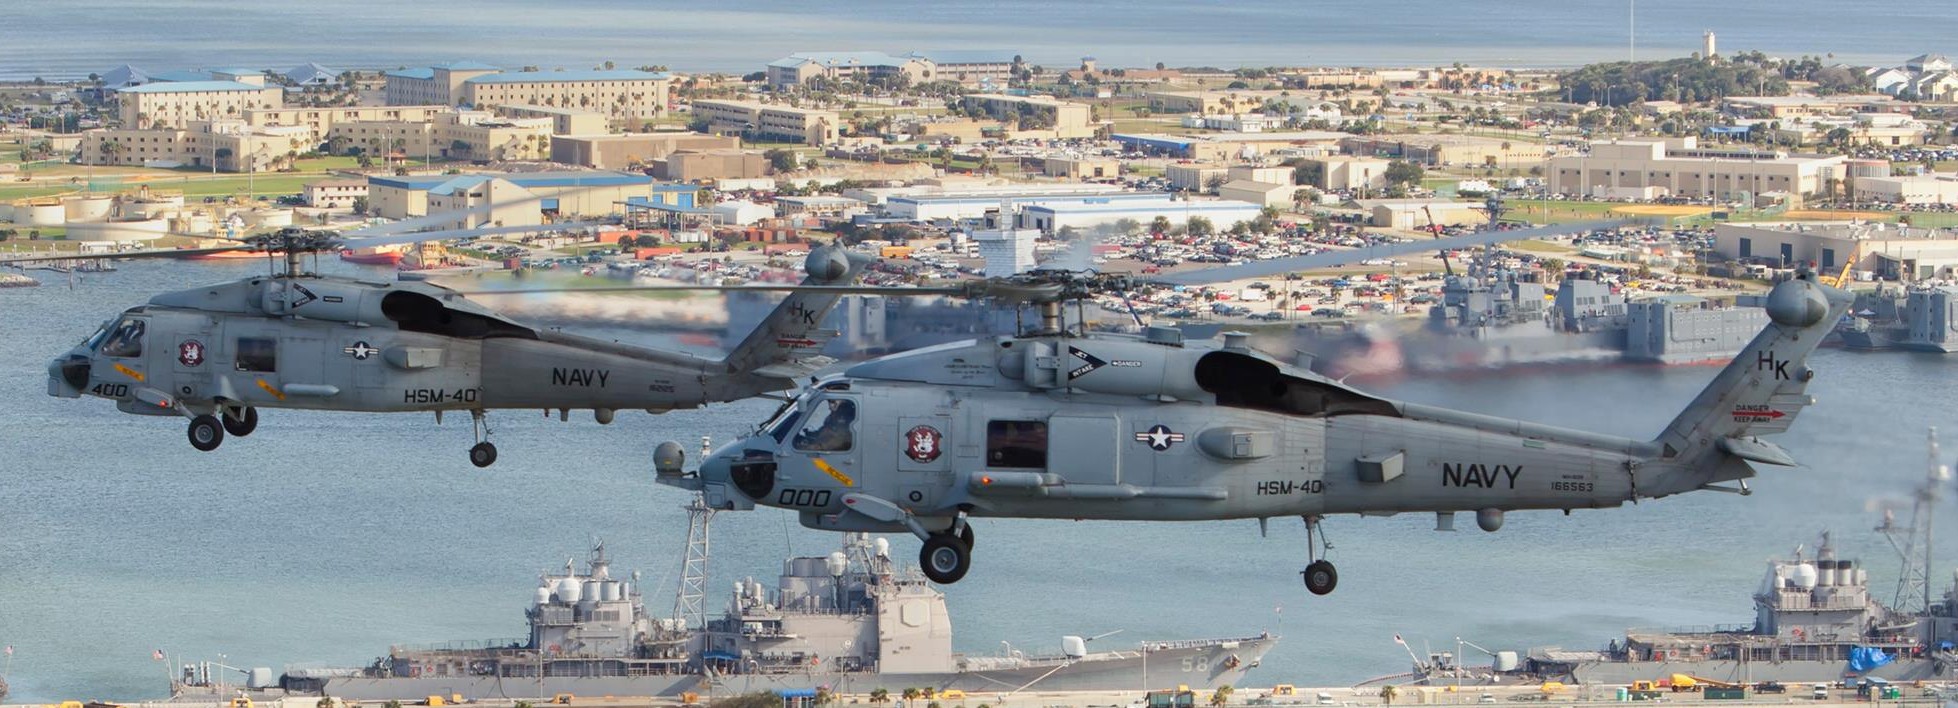 hsm-40 airwolves helicopter maritime strike squadron mh-60r seahawk mayport florida fleet replacement 02